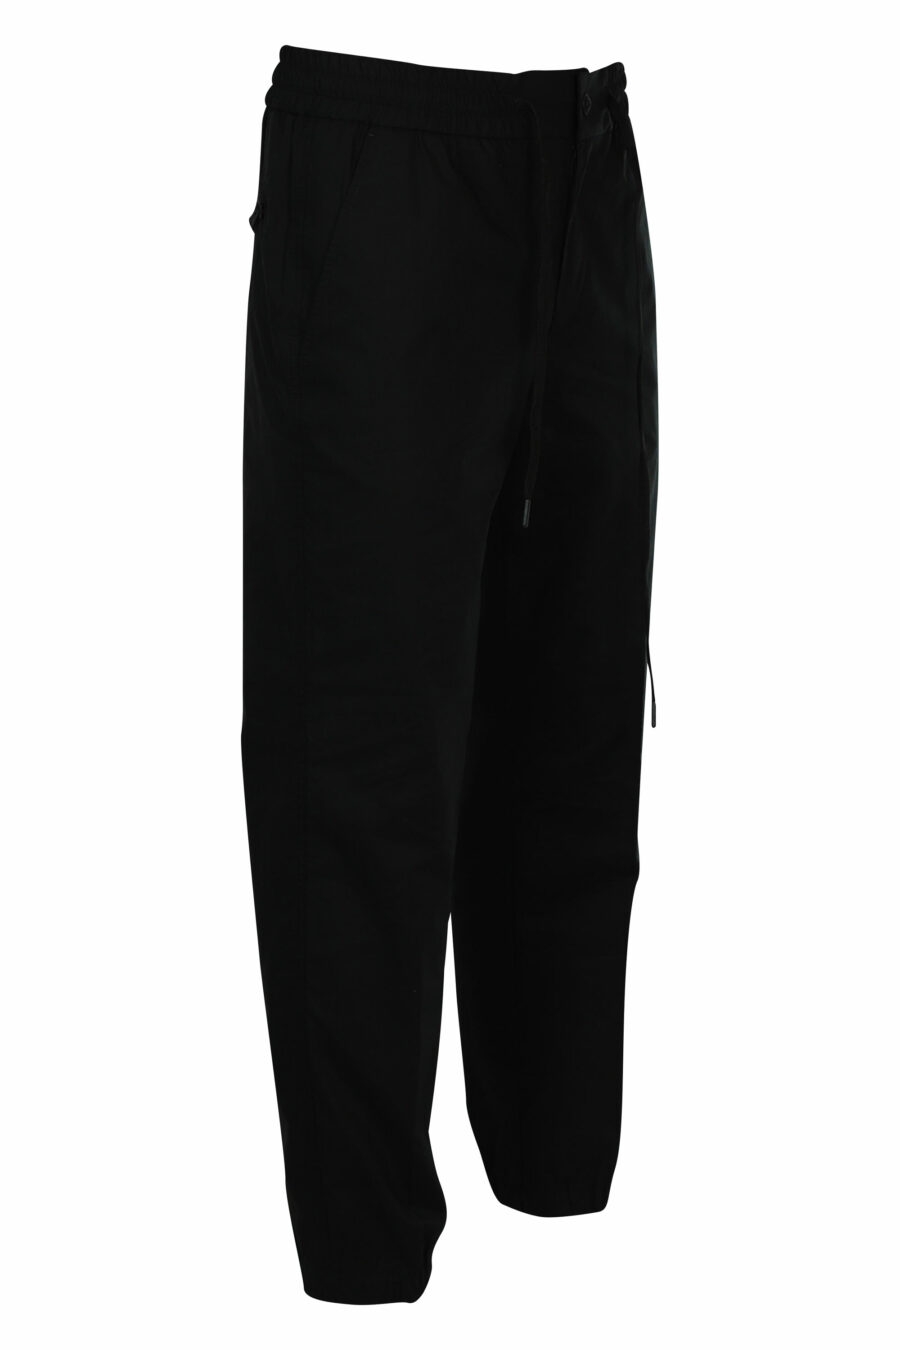 Black fishing trousers with logo - 8052019219876 2